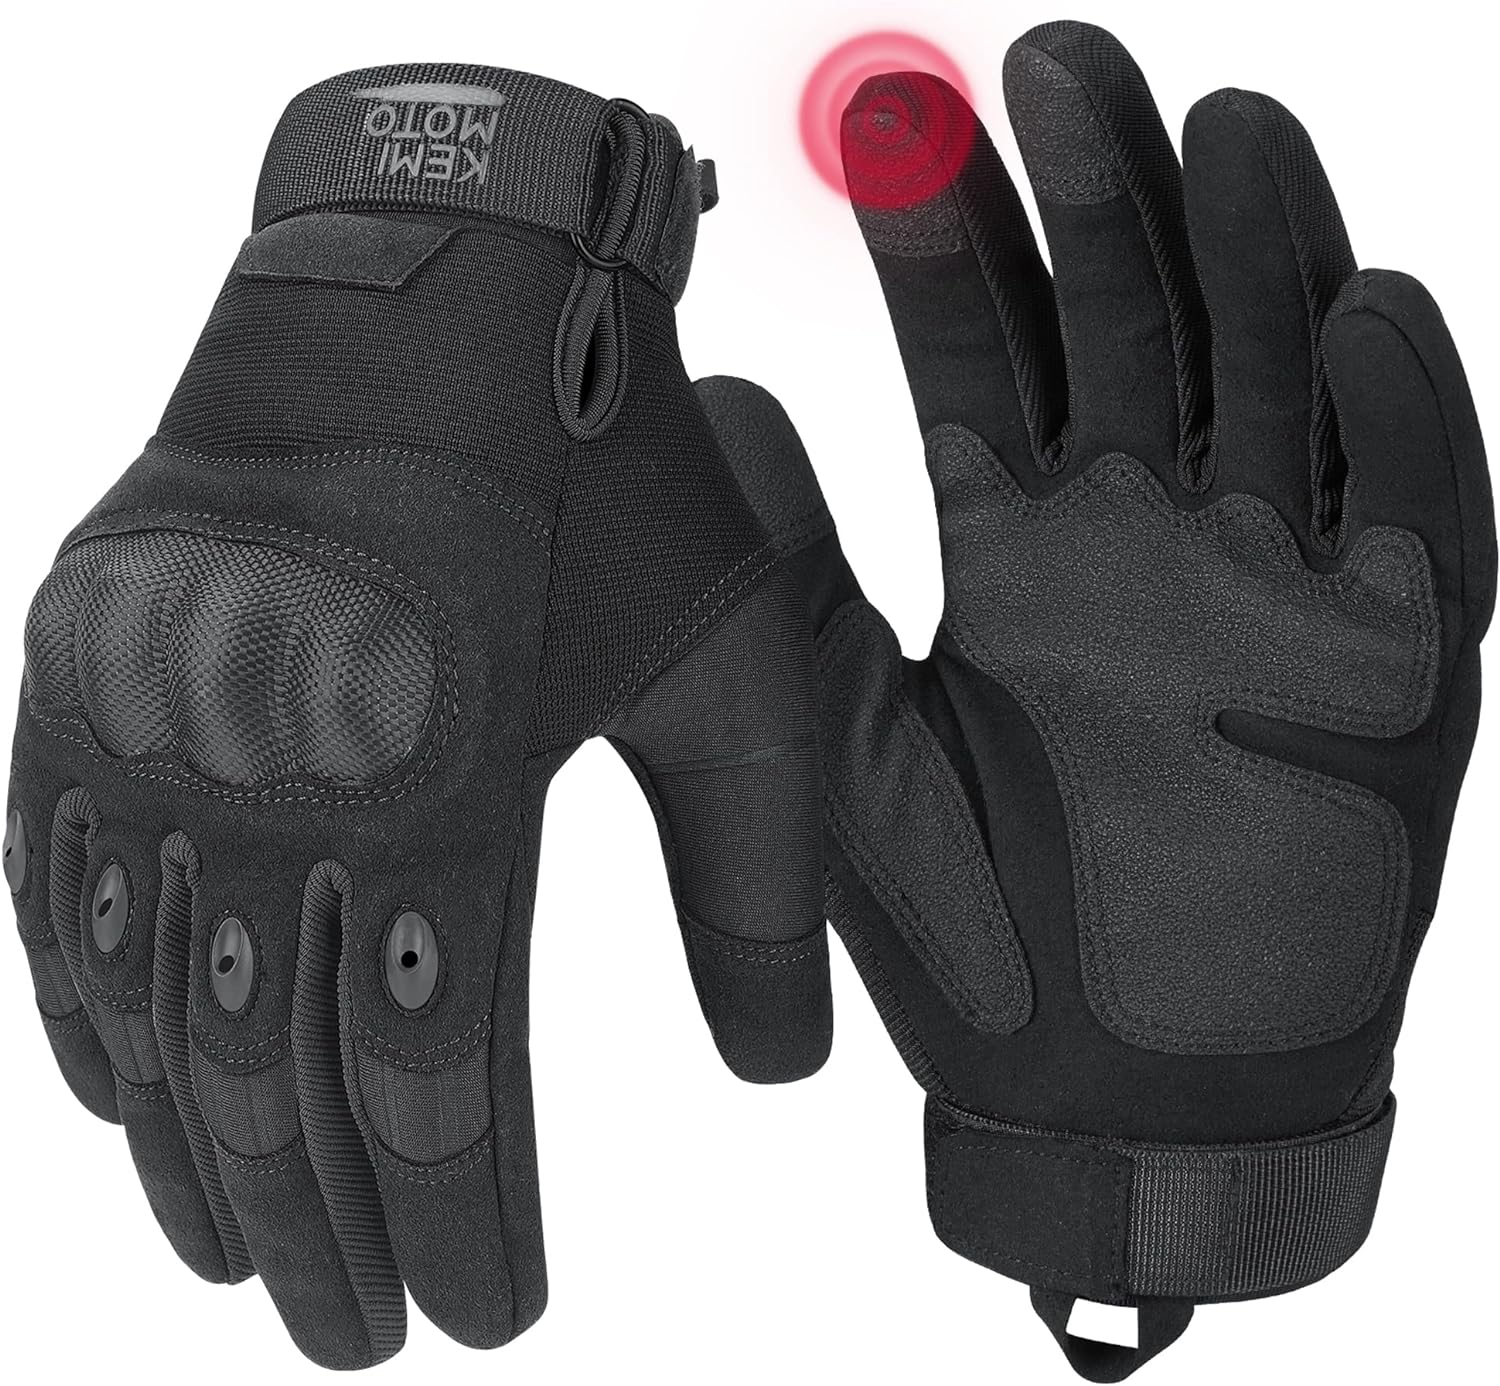 KEMIMOTO Tactical Gloves for Men, Touchscreen Motorcycle Gloves